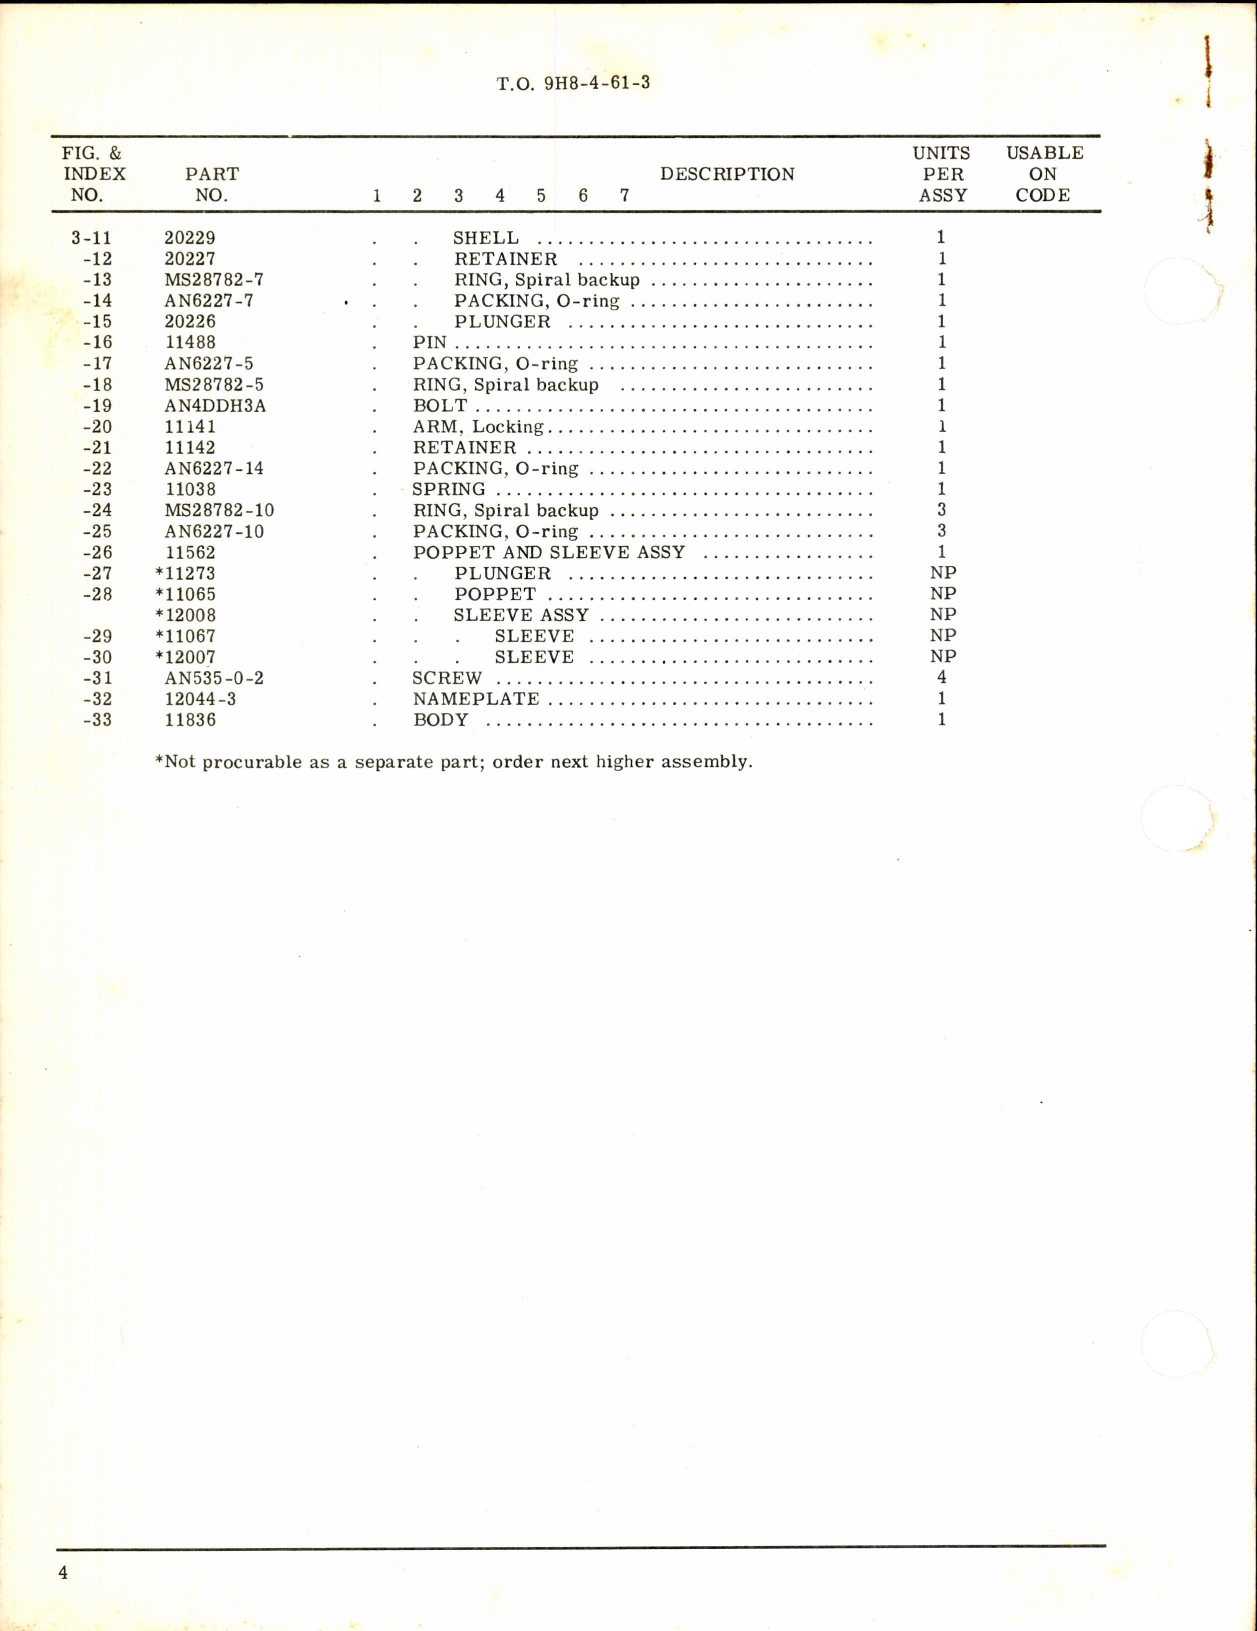 Sample page 4 from AirCorps Library document: Parts Breakdown for Hydraulic Shutoff Valve Part No 12660